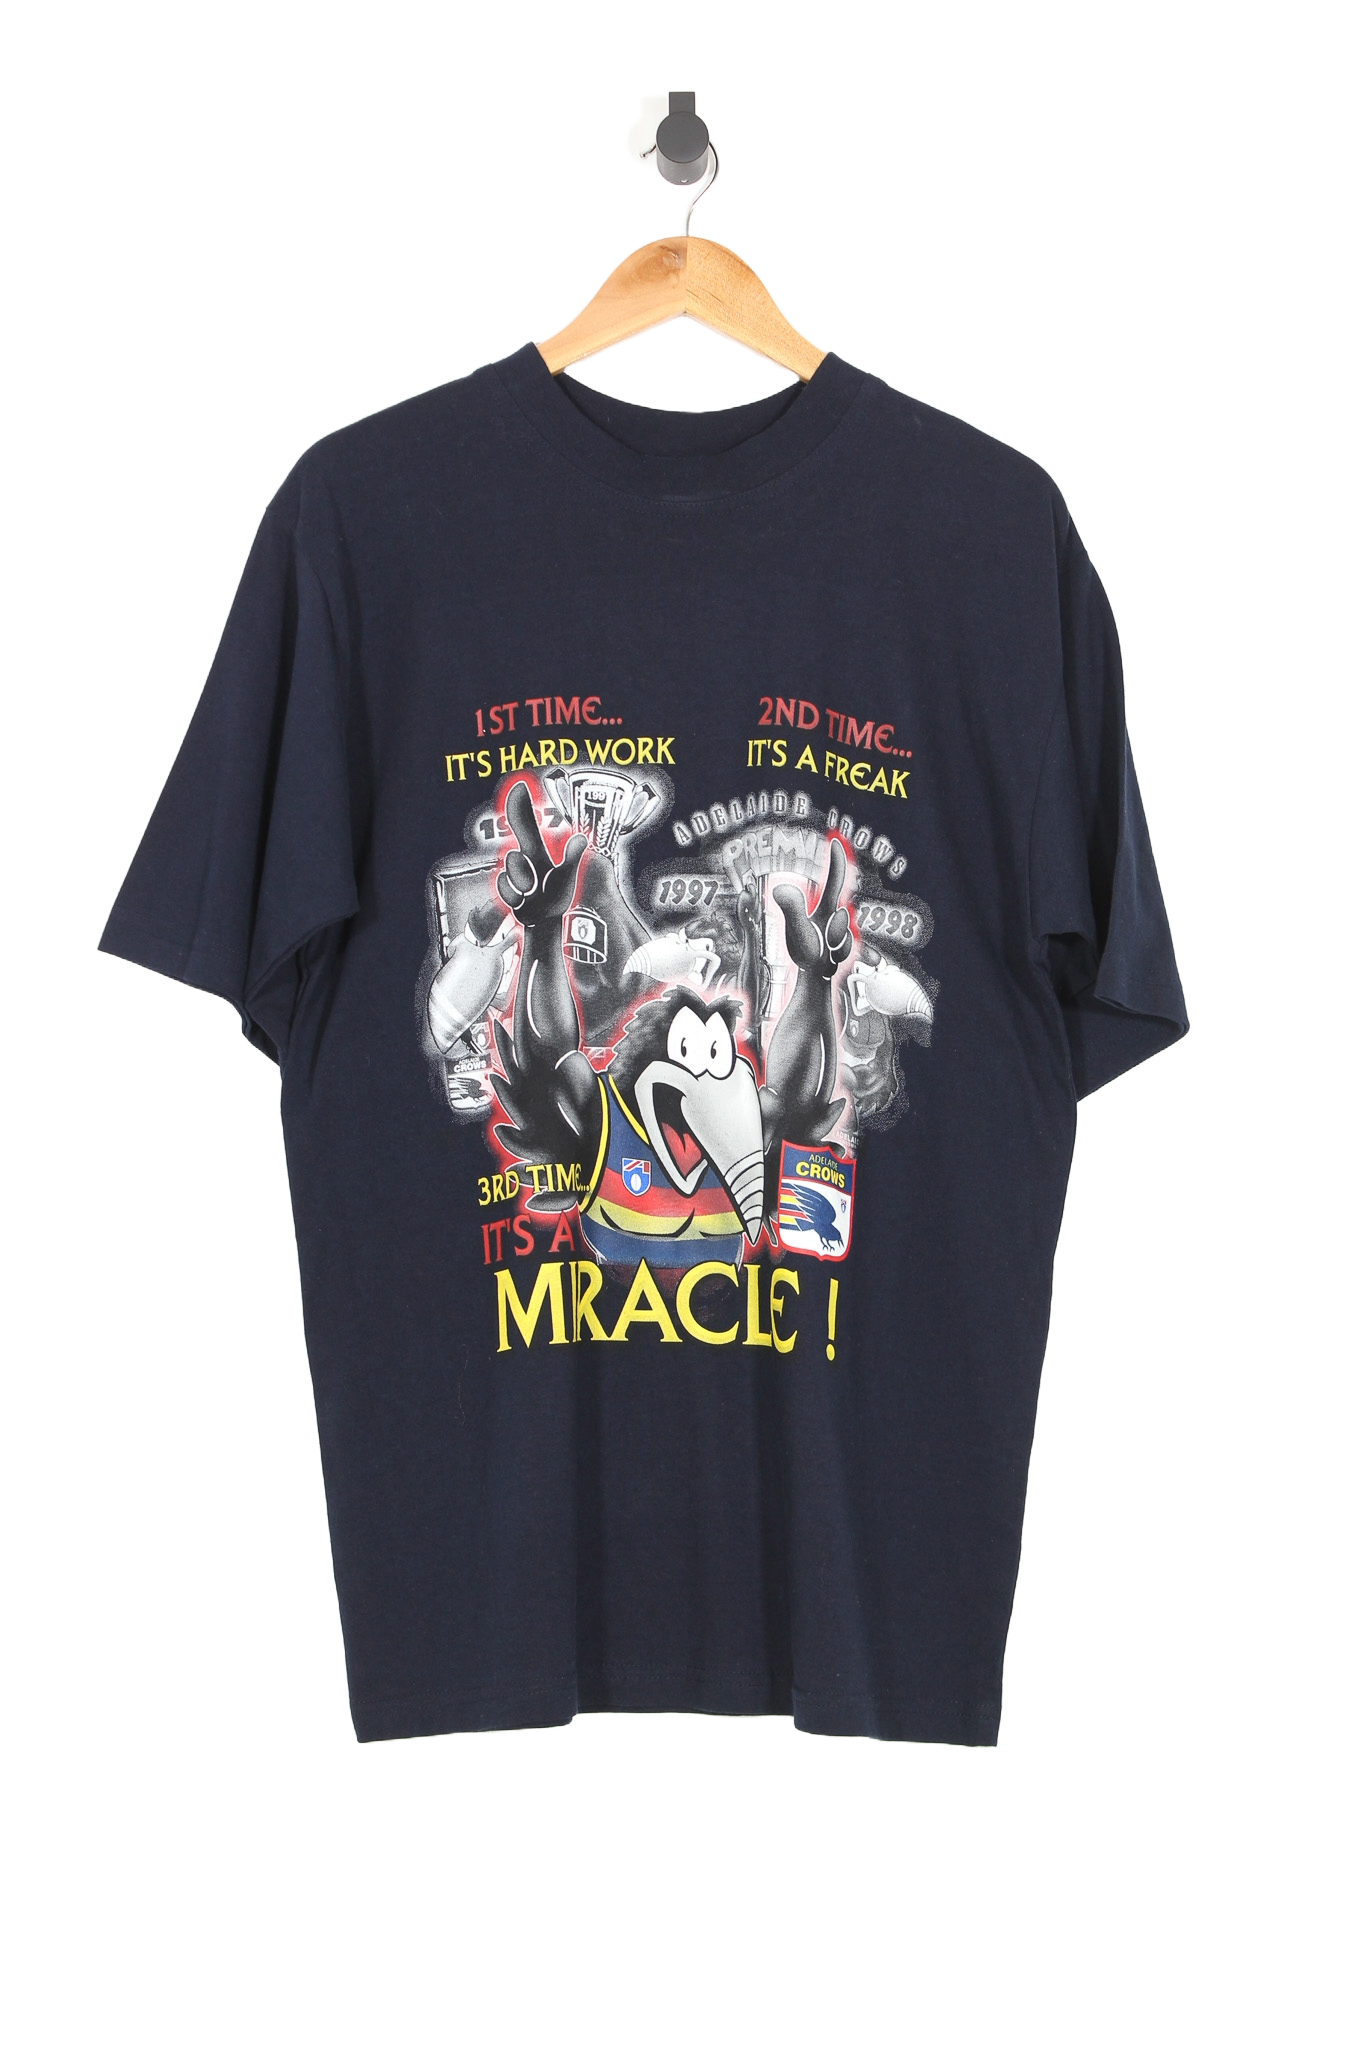 Vintage 1998 Adelaide Crows 3rd Time It's A Miracle! T-Shirt - L